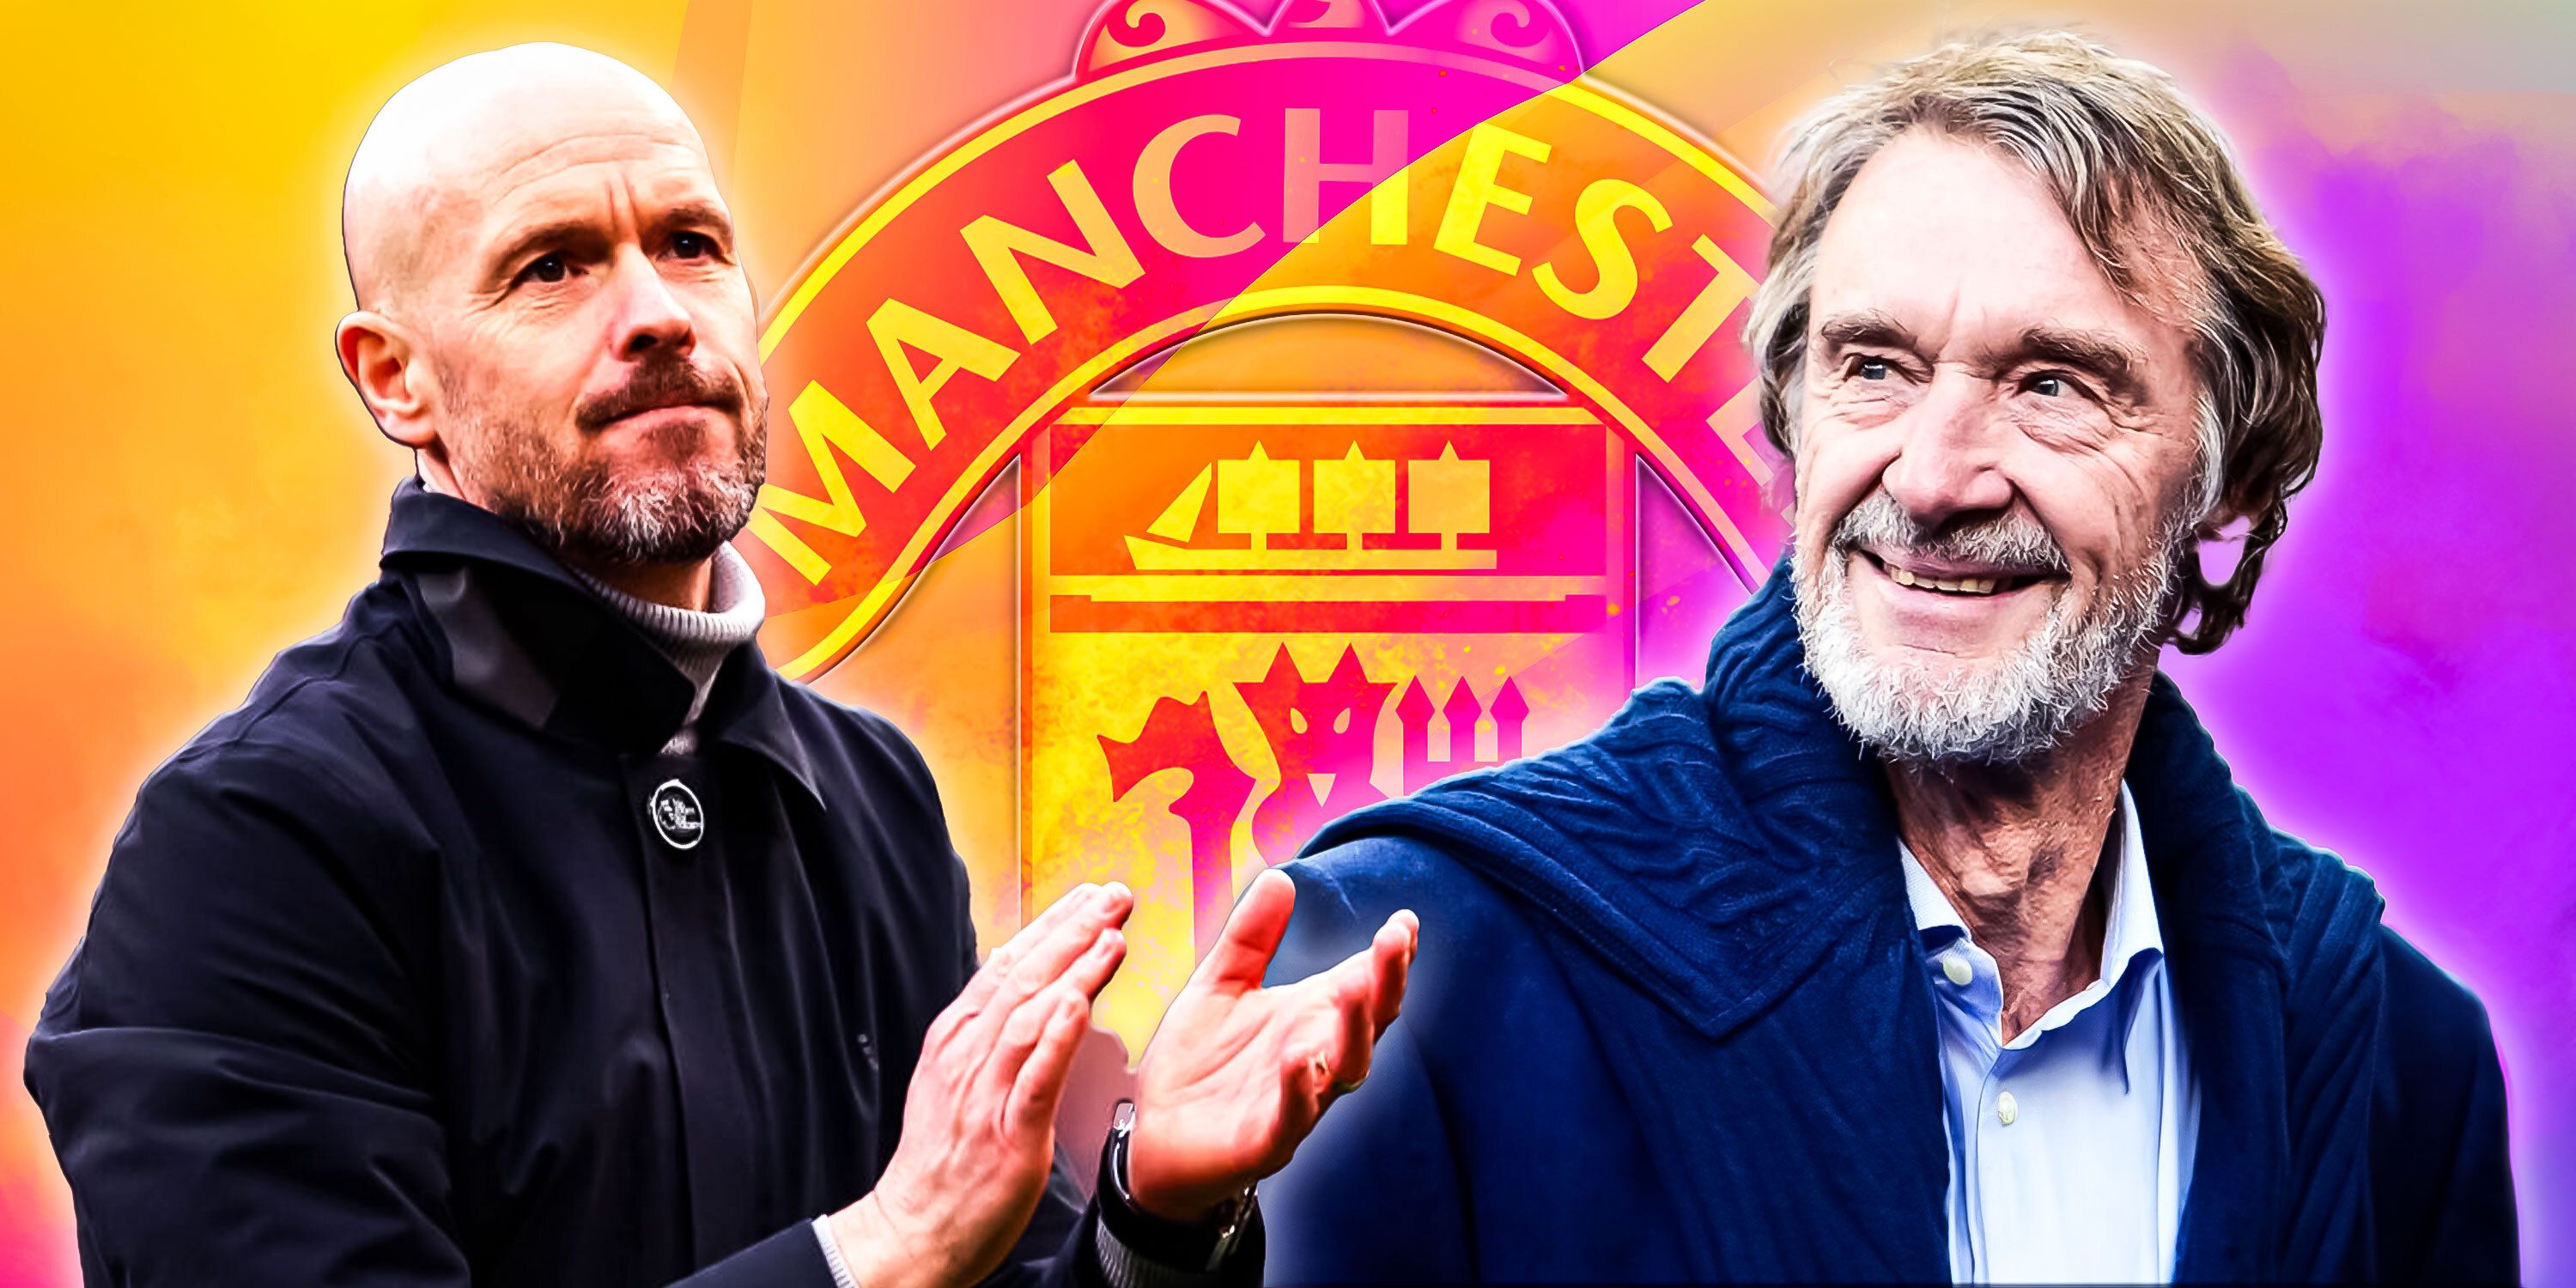 Manchester United manager Erik ten Hag and co-owner Sir Jim Ratcliffe